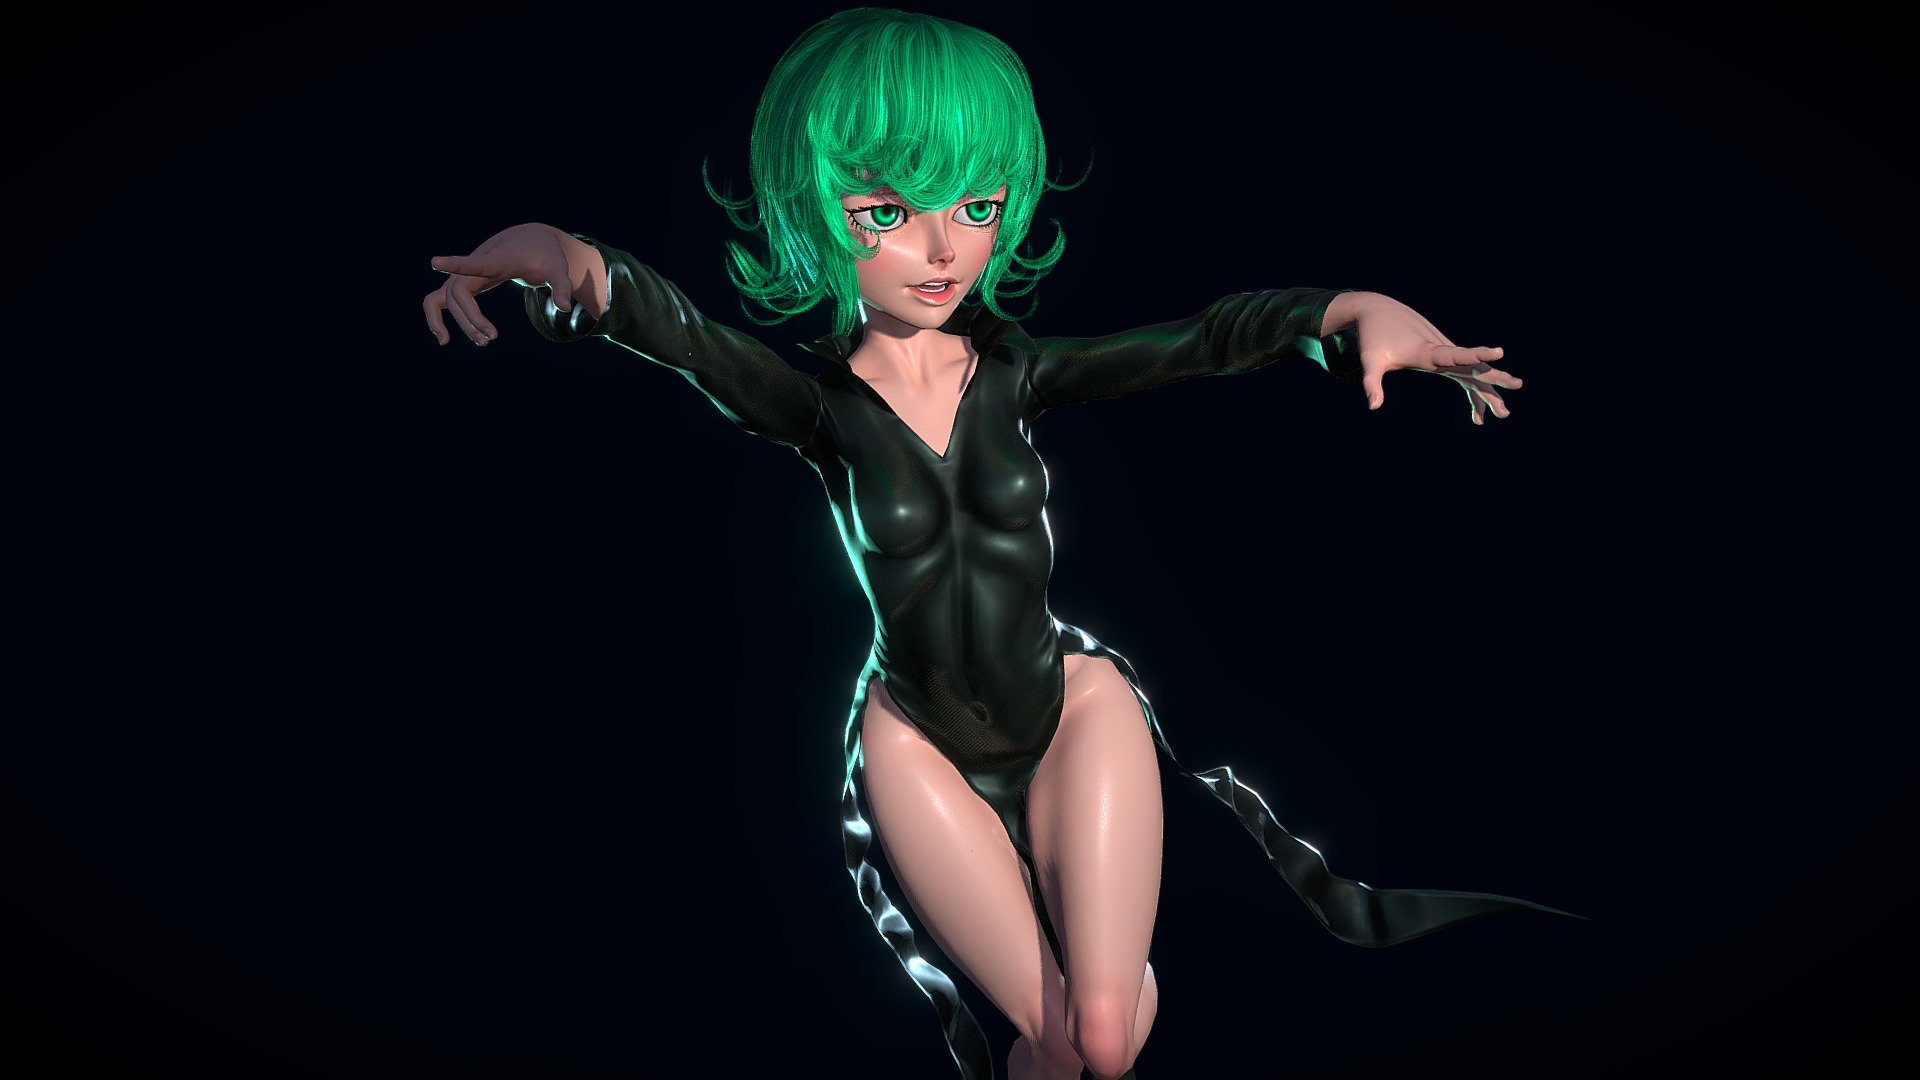 Low-poly 3D model of Tatsumaki, a character from the webcomic and manga “Onepunch-Man”.
This model doesn't contain any n-gons and has optimal topology, also contain six texture sets.
Also, this model doesn't have a rig 3d model